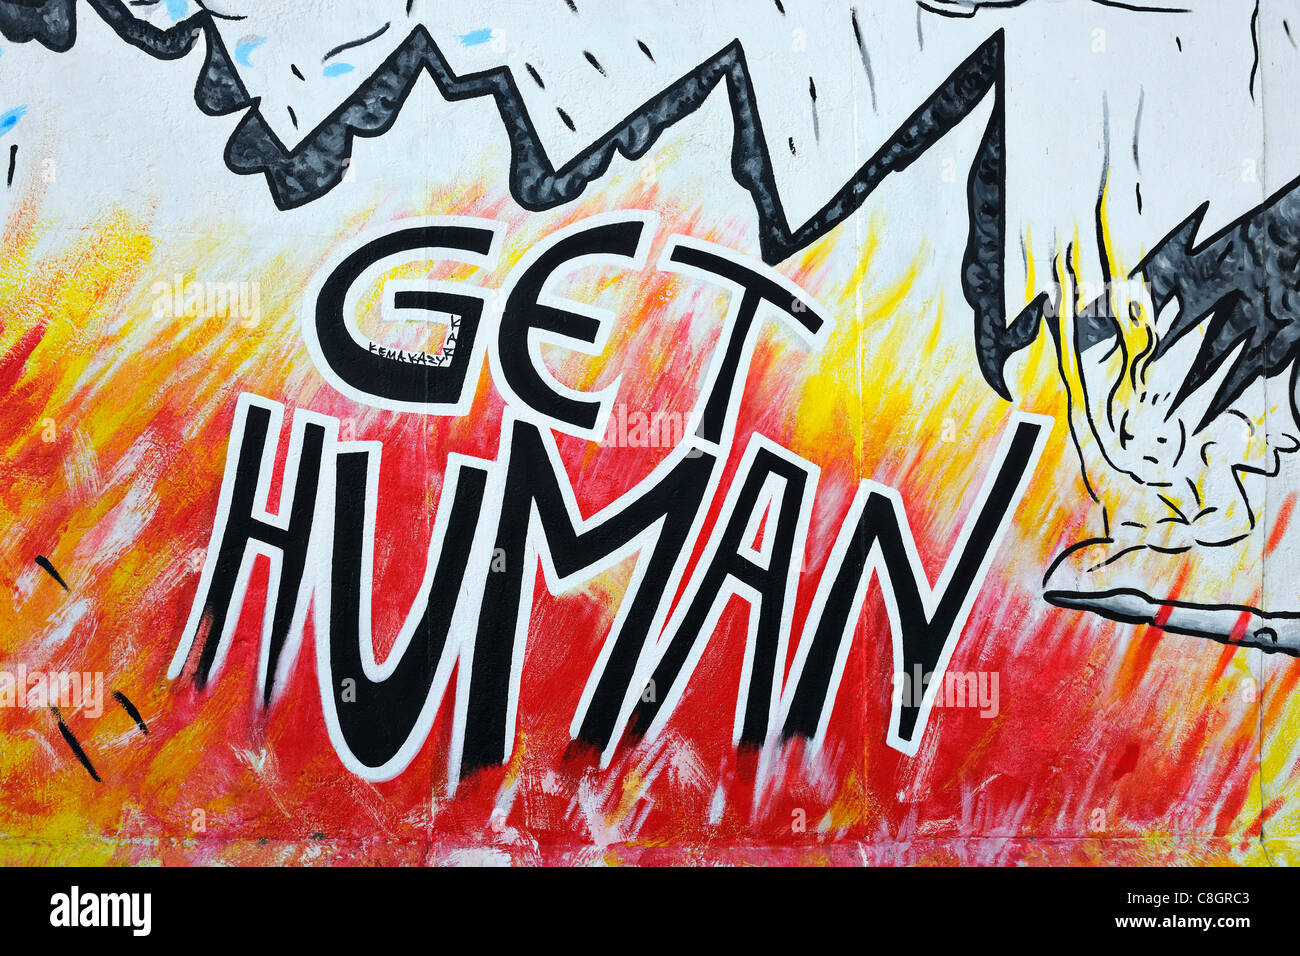 Mural called "Get Human" on Berlin Wall at East Side Gallery in Berlin, Germany, Europe Stock Photo